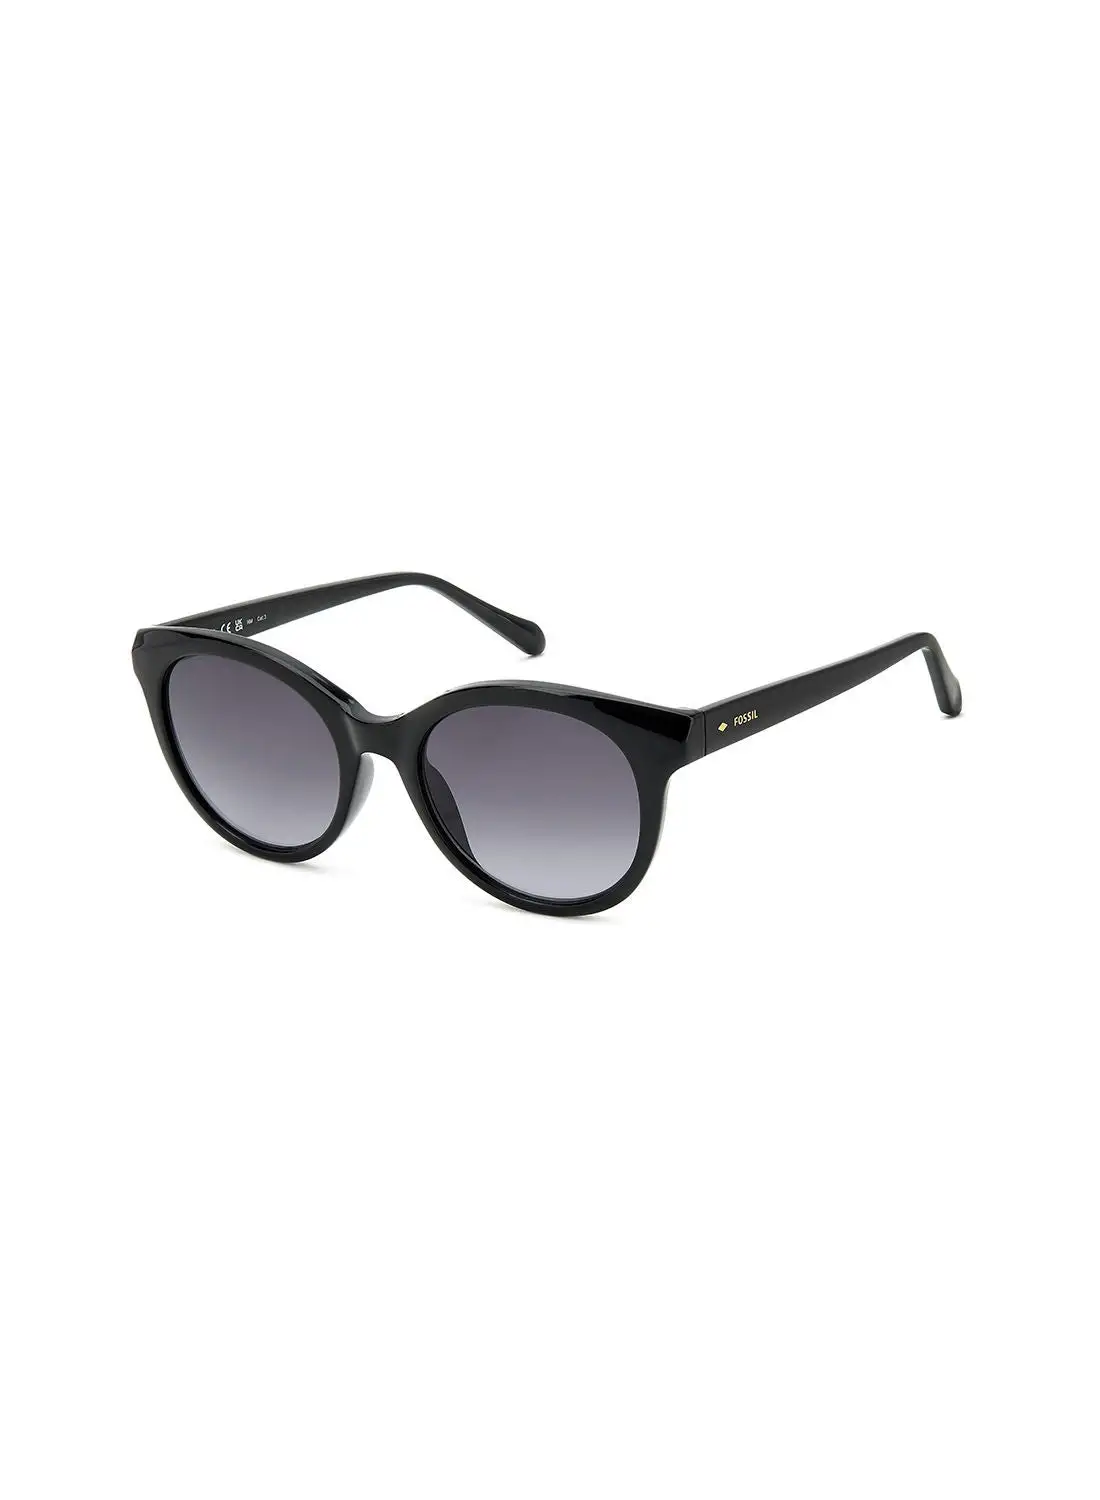 FOSSIL Women's UV Protection Round Sunglasses - Fos 3146/G/S Black 53 - Lens Size: 53 Mm